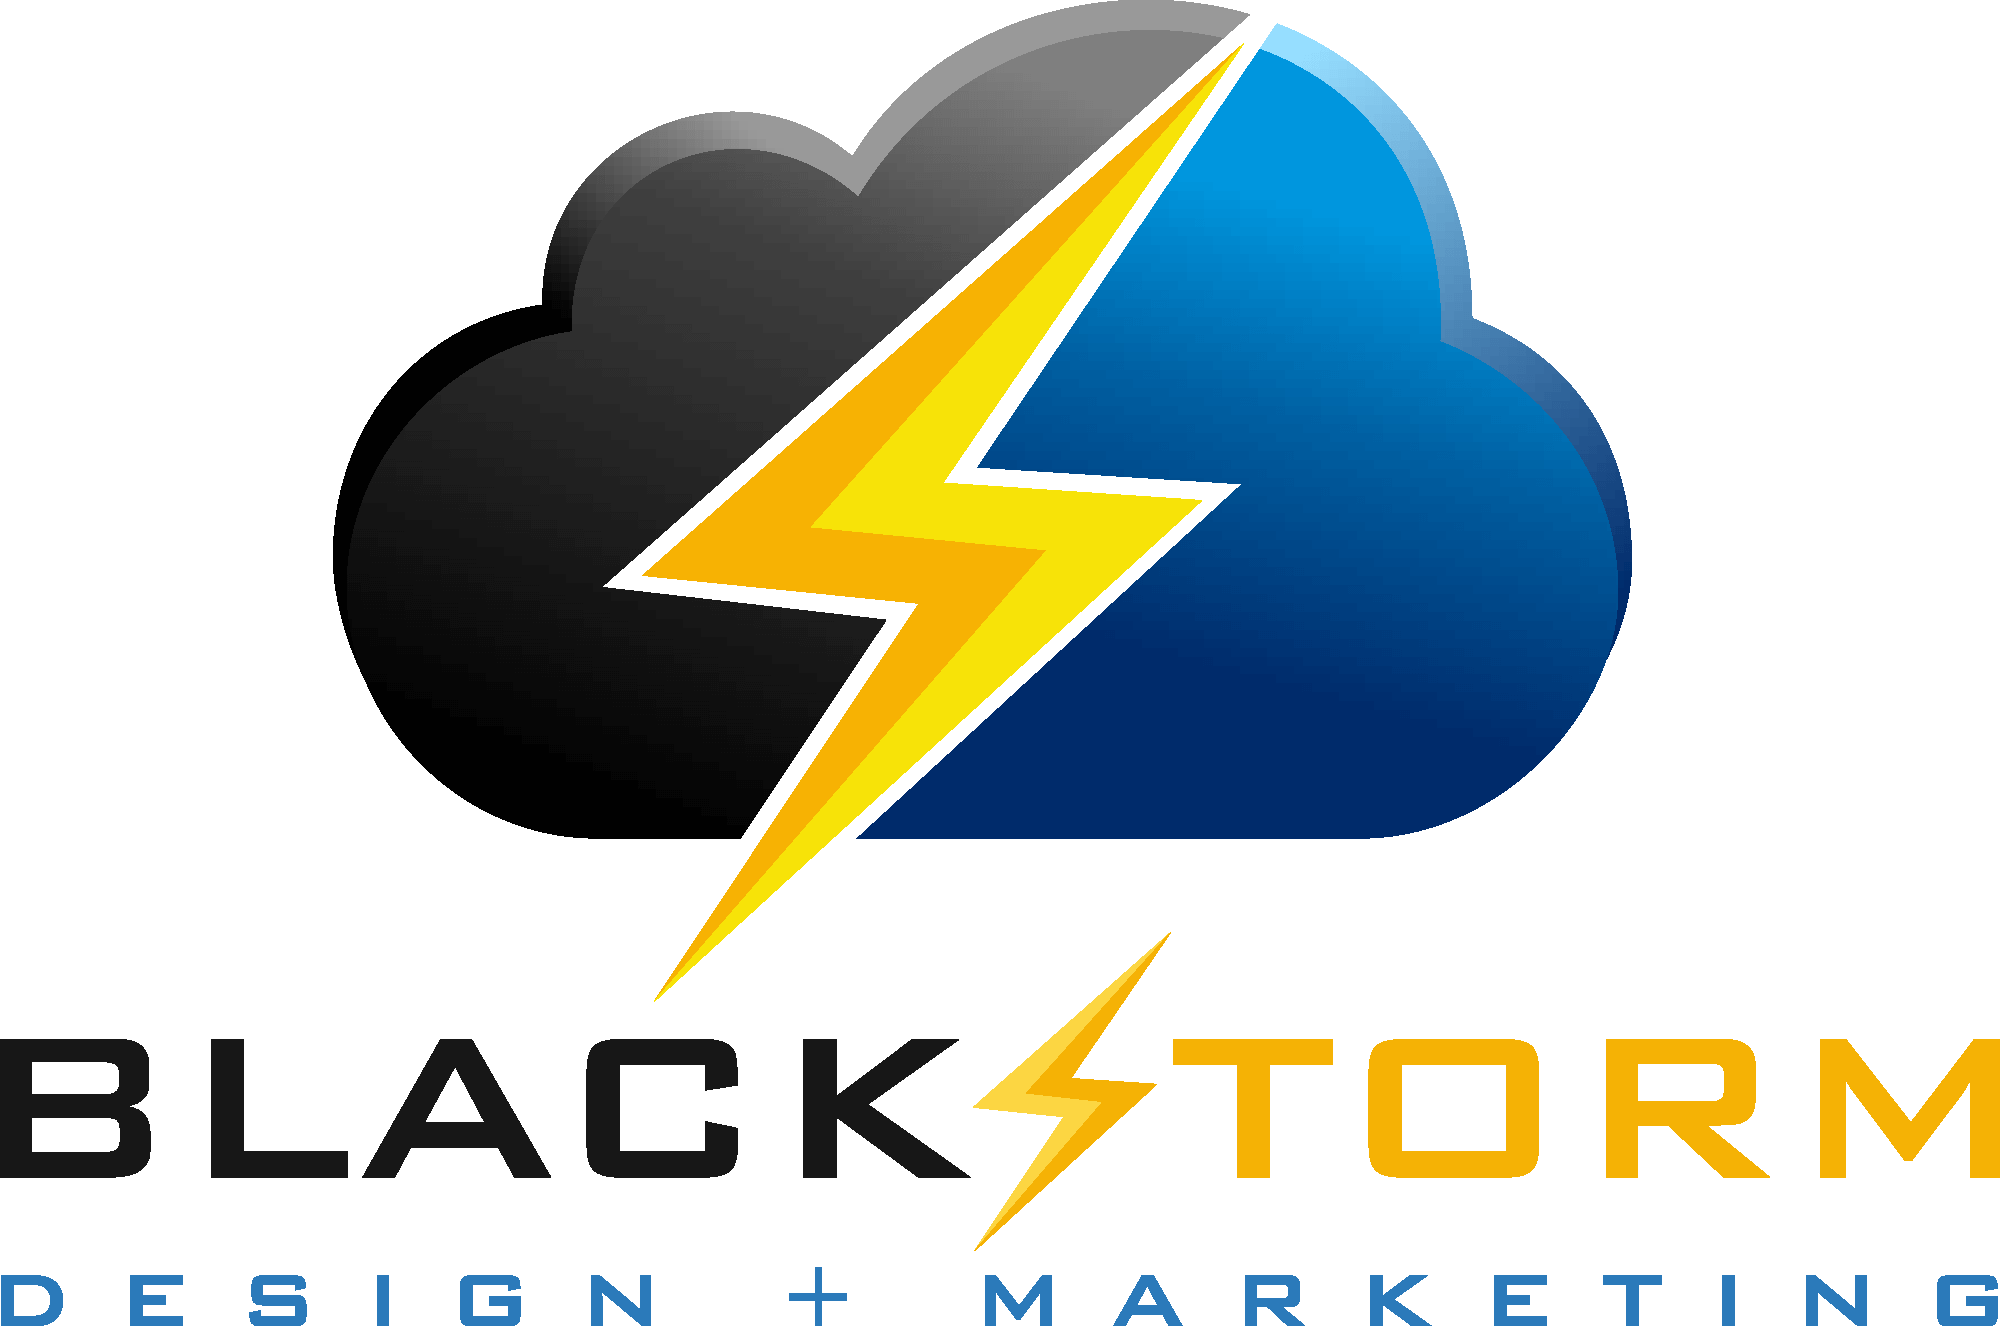 BlackStorm's Website Design Service Drives Results for Roofing Companies